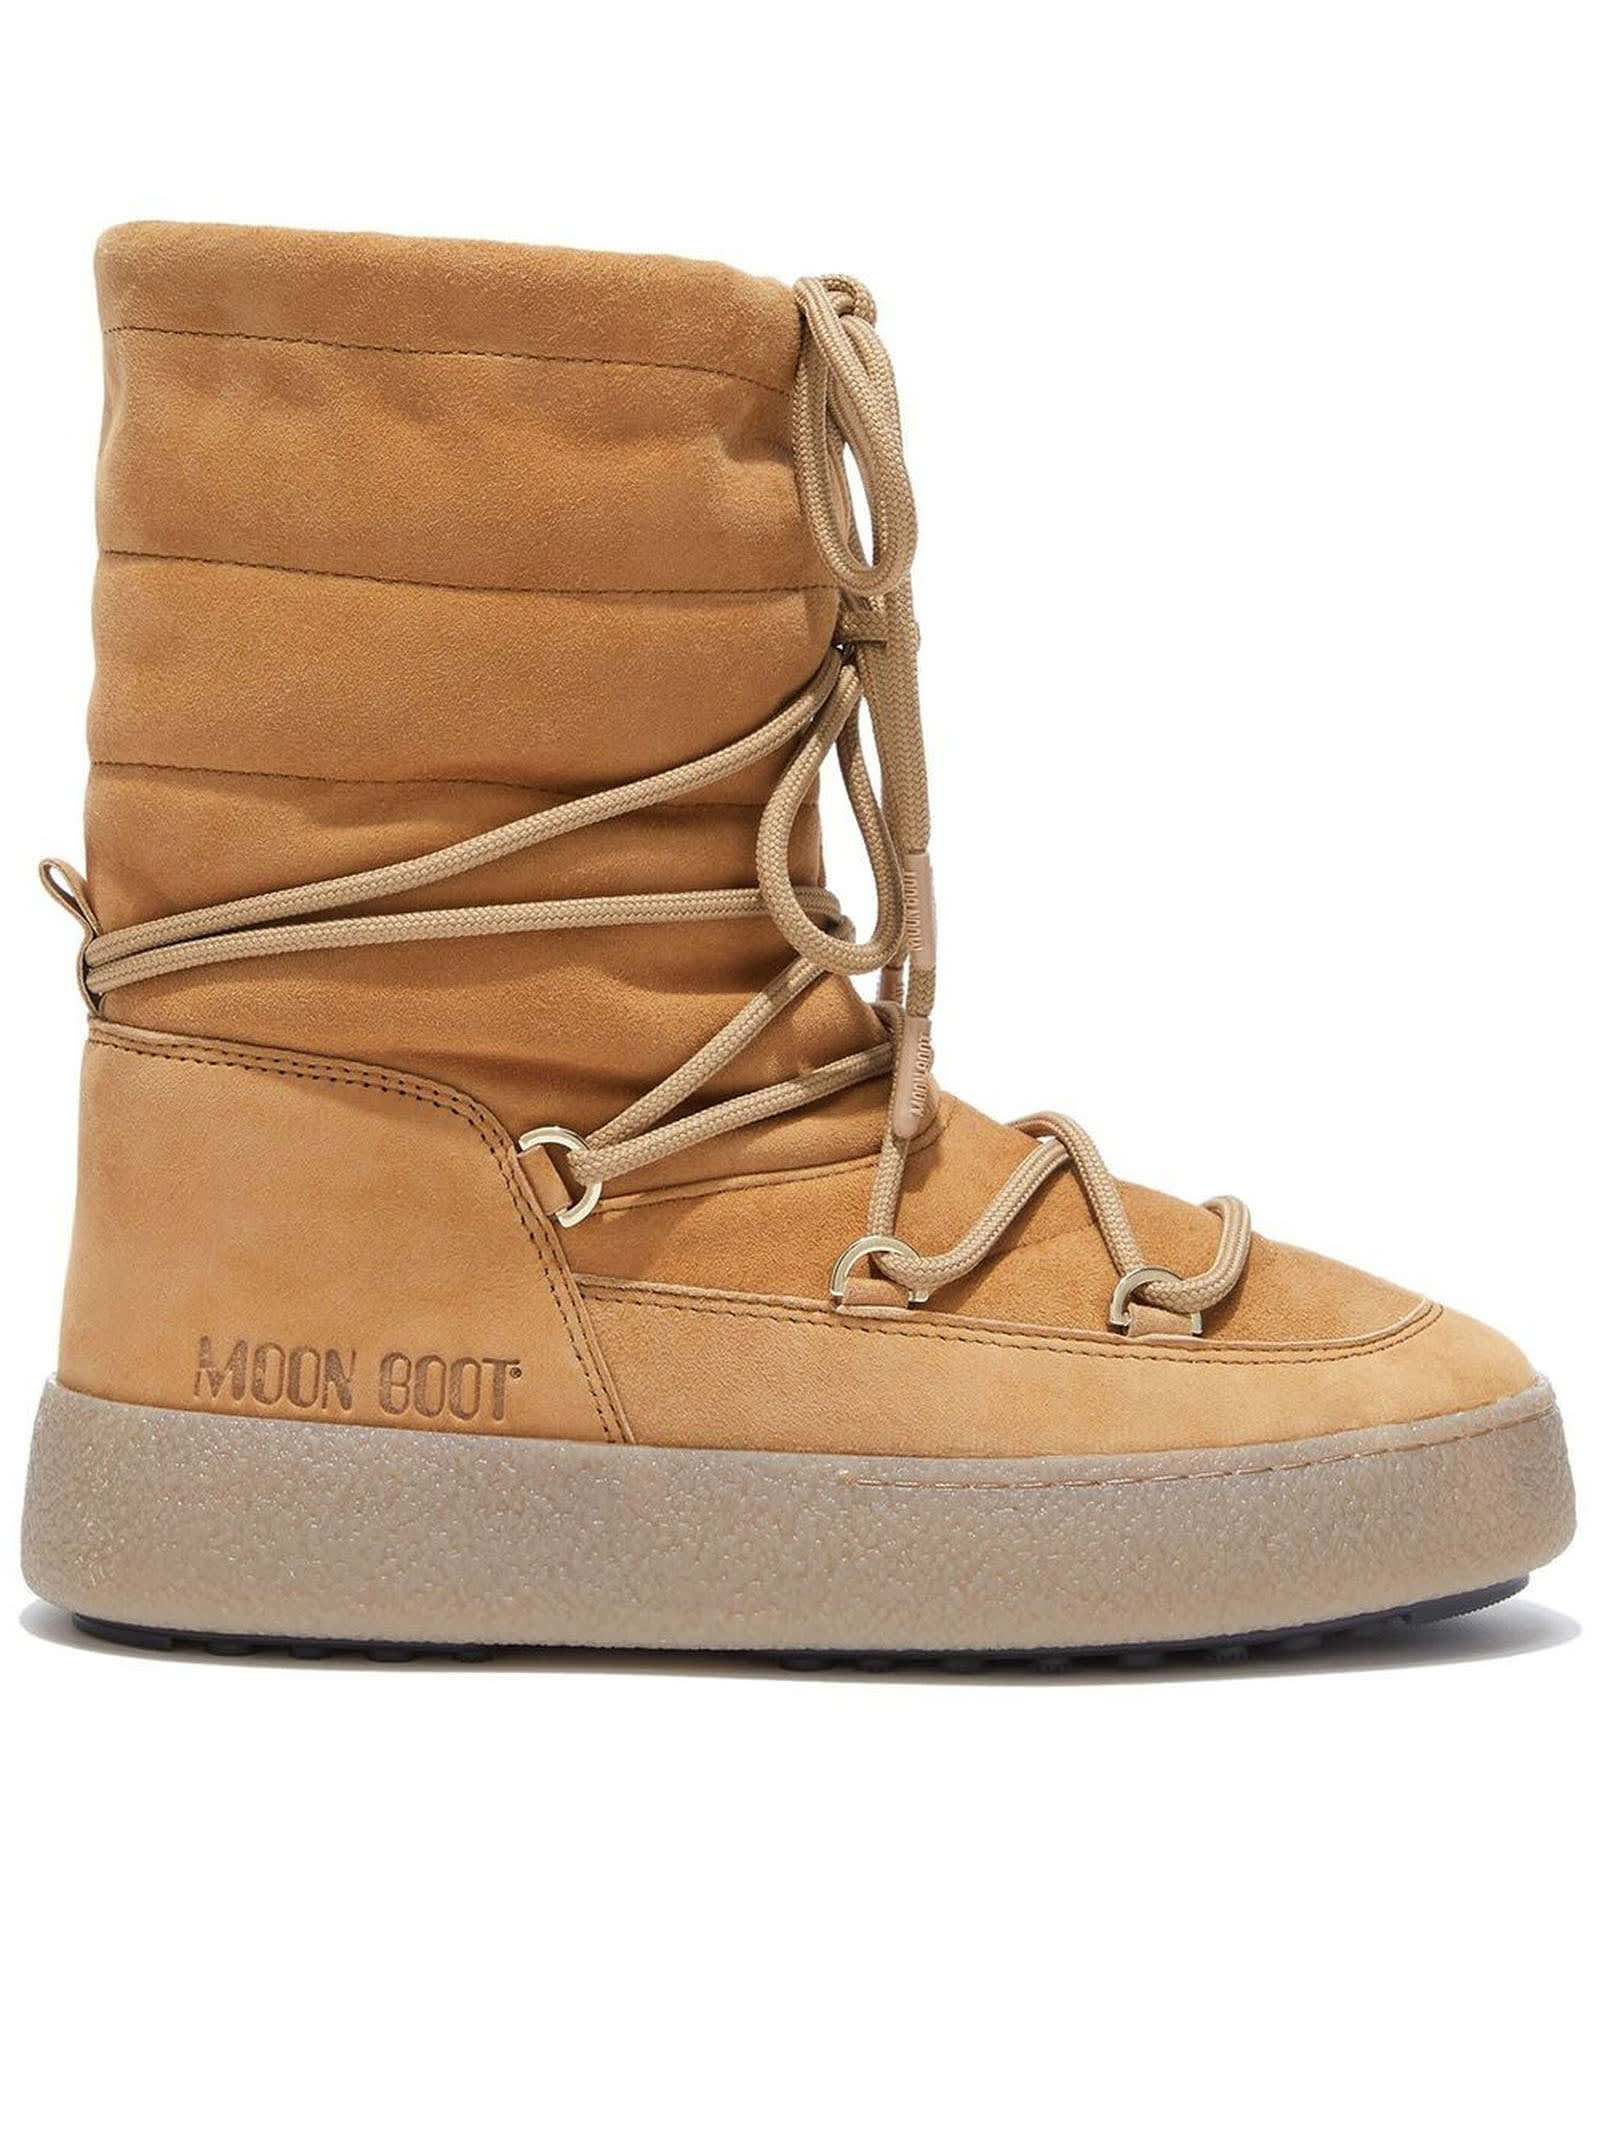 Moon Boot Ltrack Tan Suede Boots